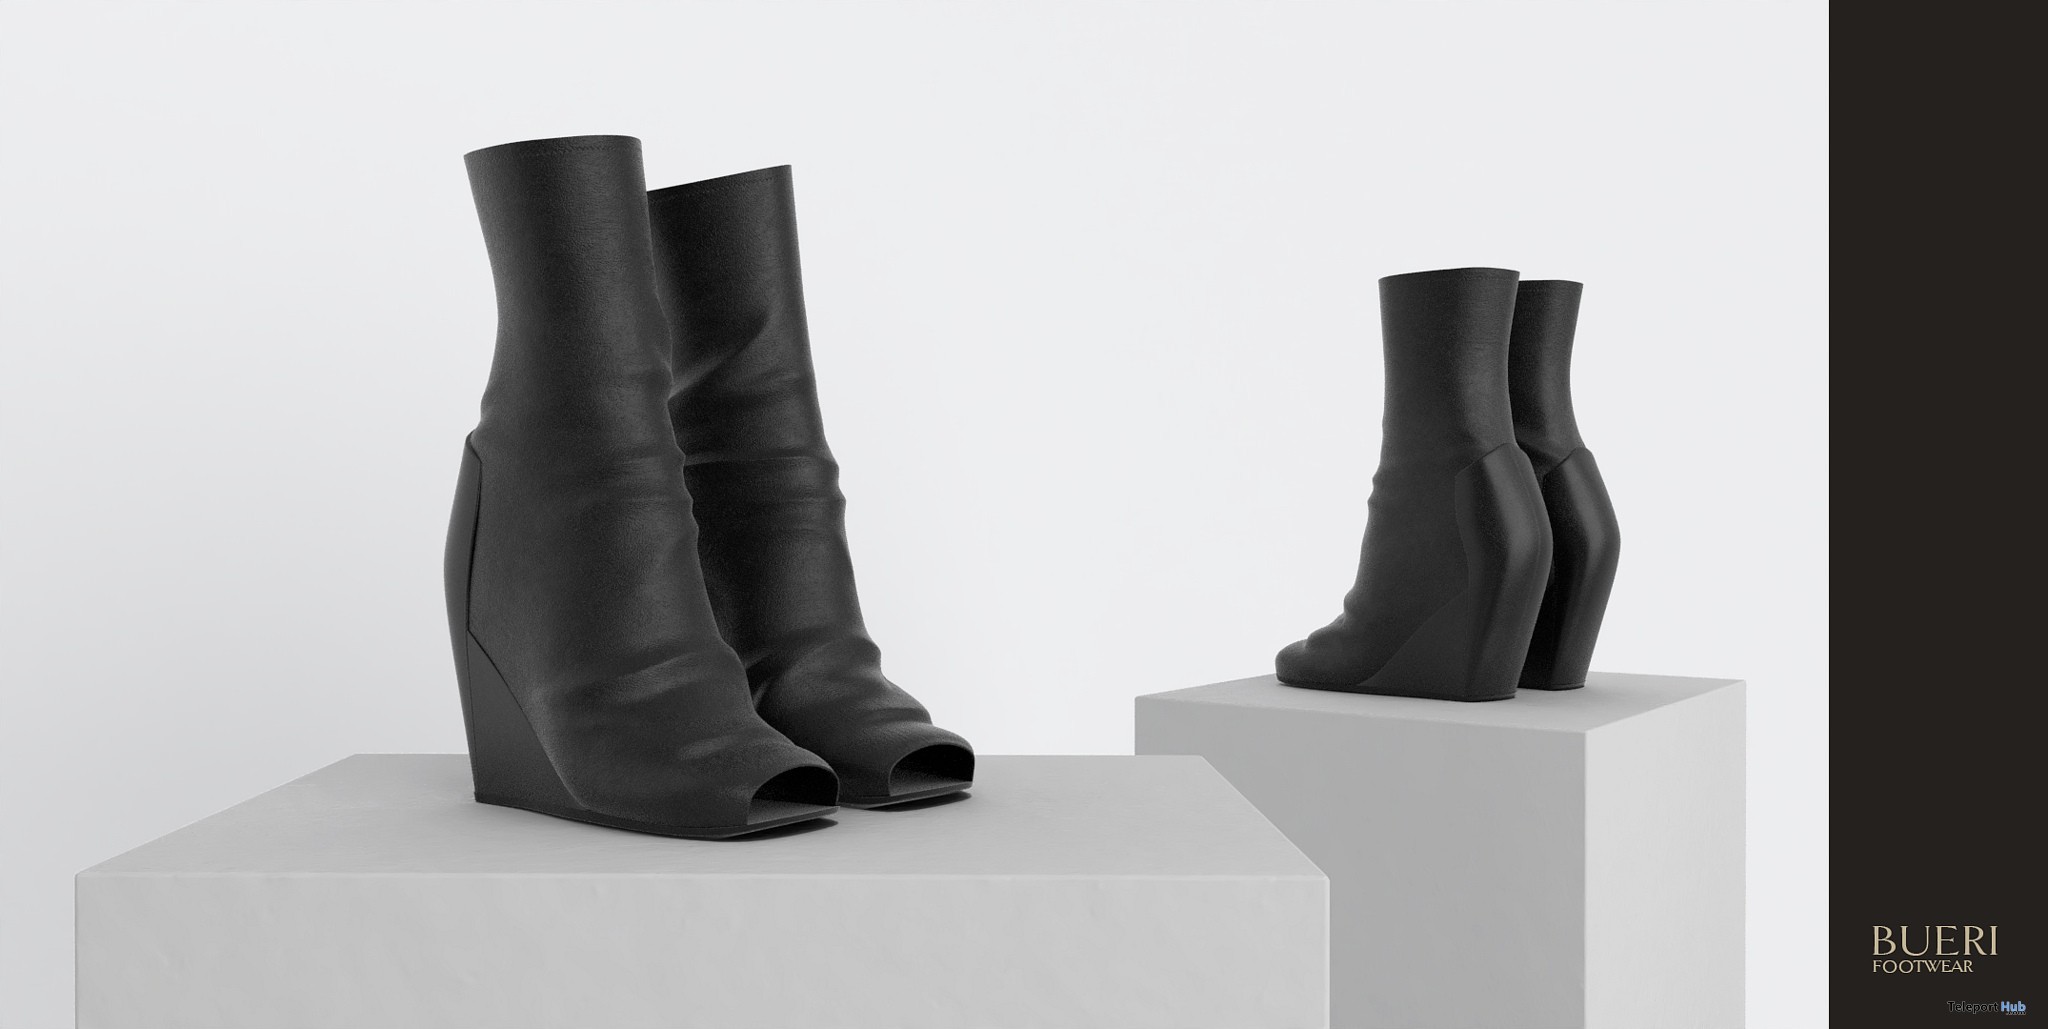 New Release: Xenia Open-Toe Wedge Boots Fatpack by Bueri @ Shiny Shabby July 2018 - Teleport Hub - teleporthub.com